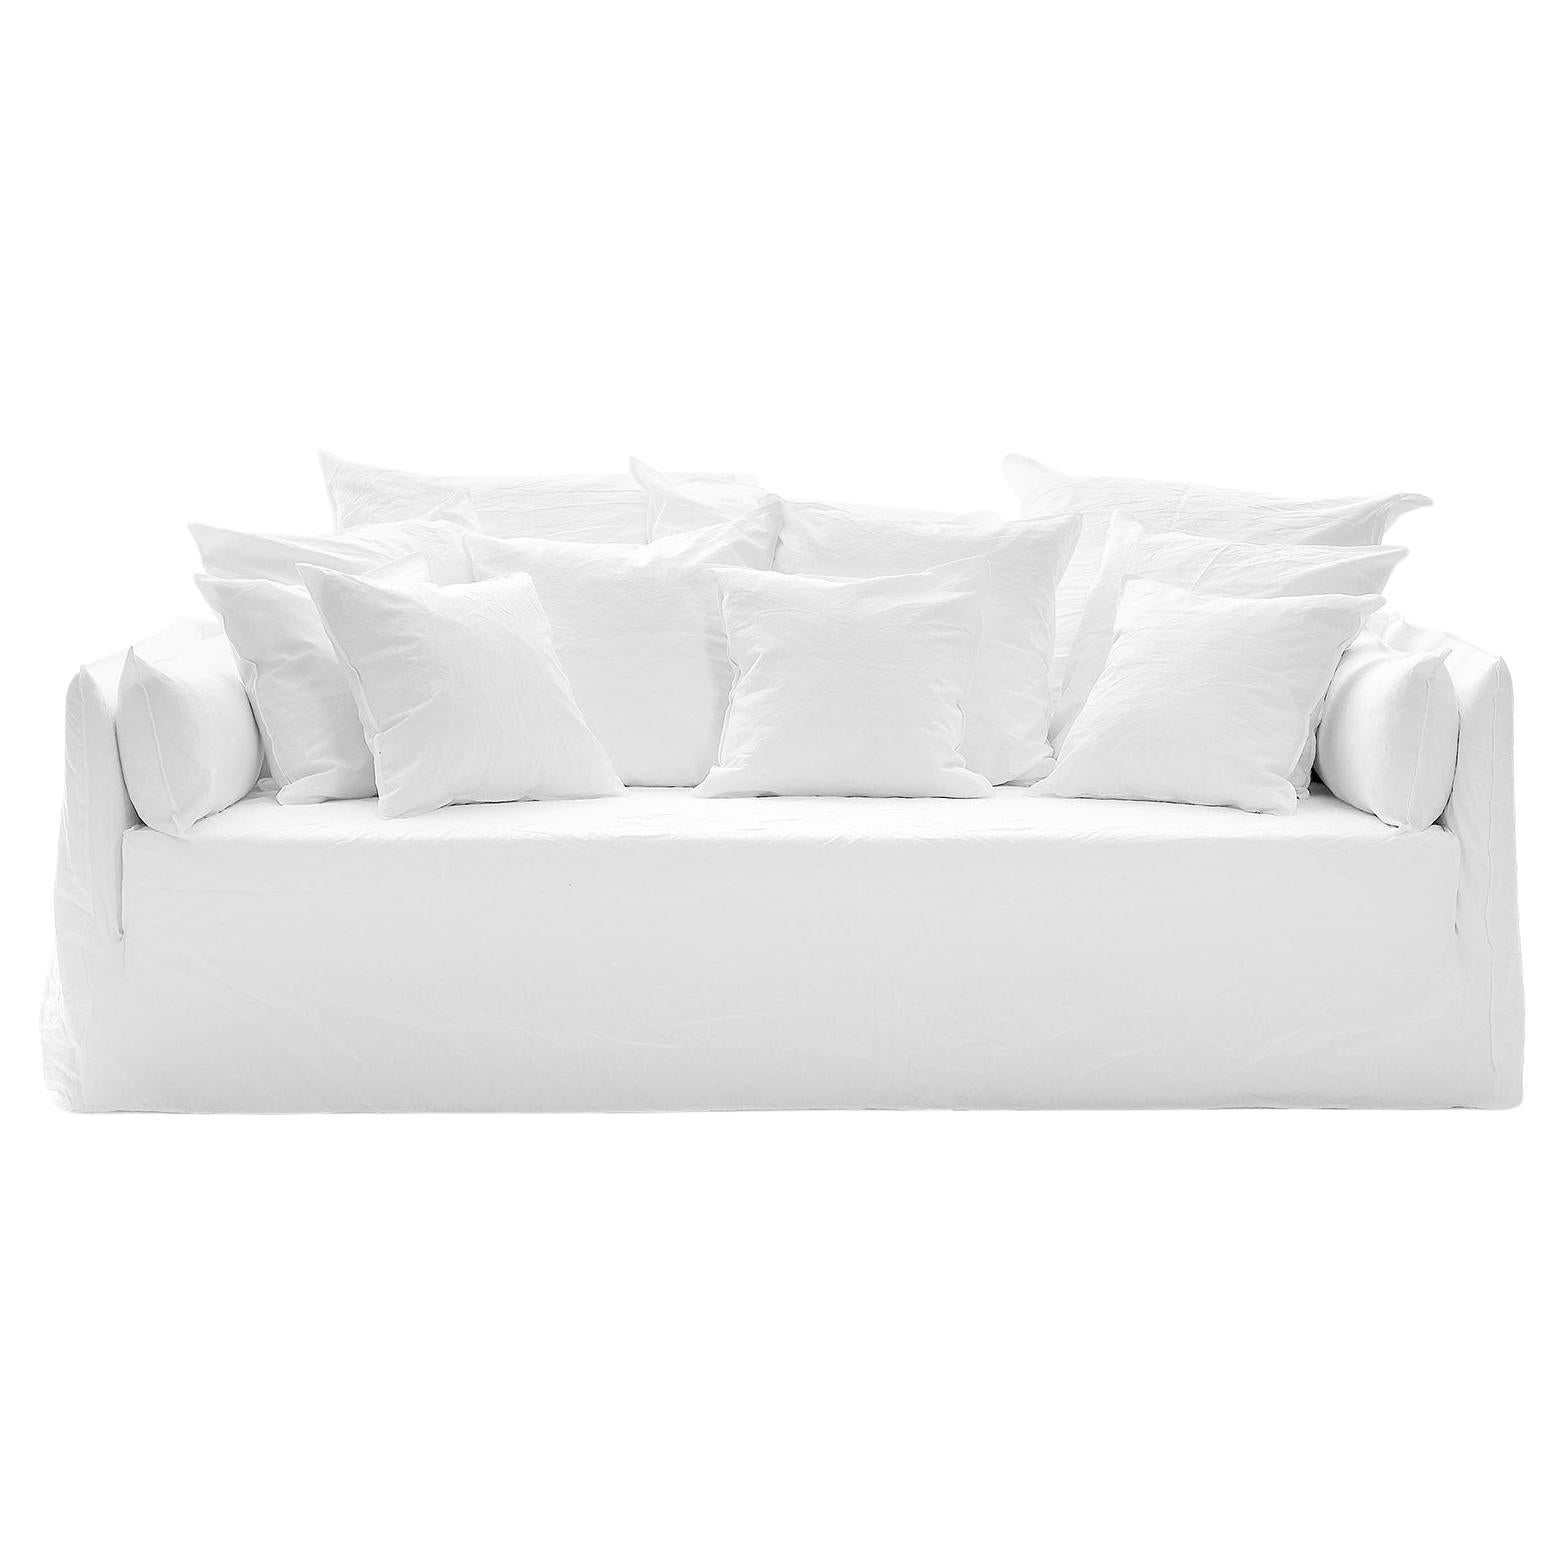 Gervasoni Ghost 16 Sofa in White Linen Upholstery by Paola Navone